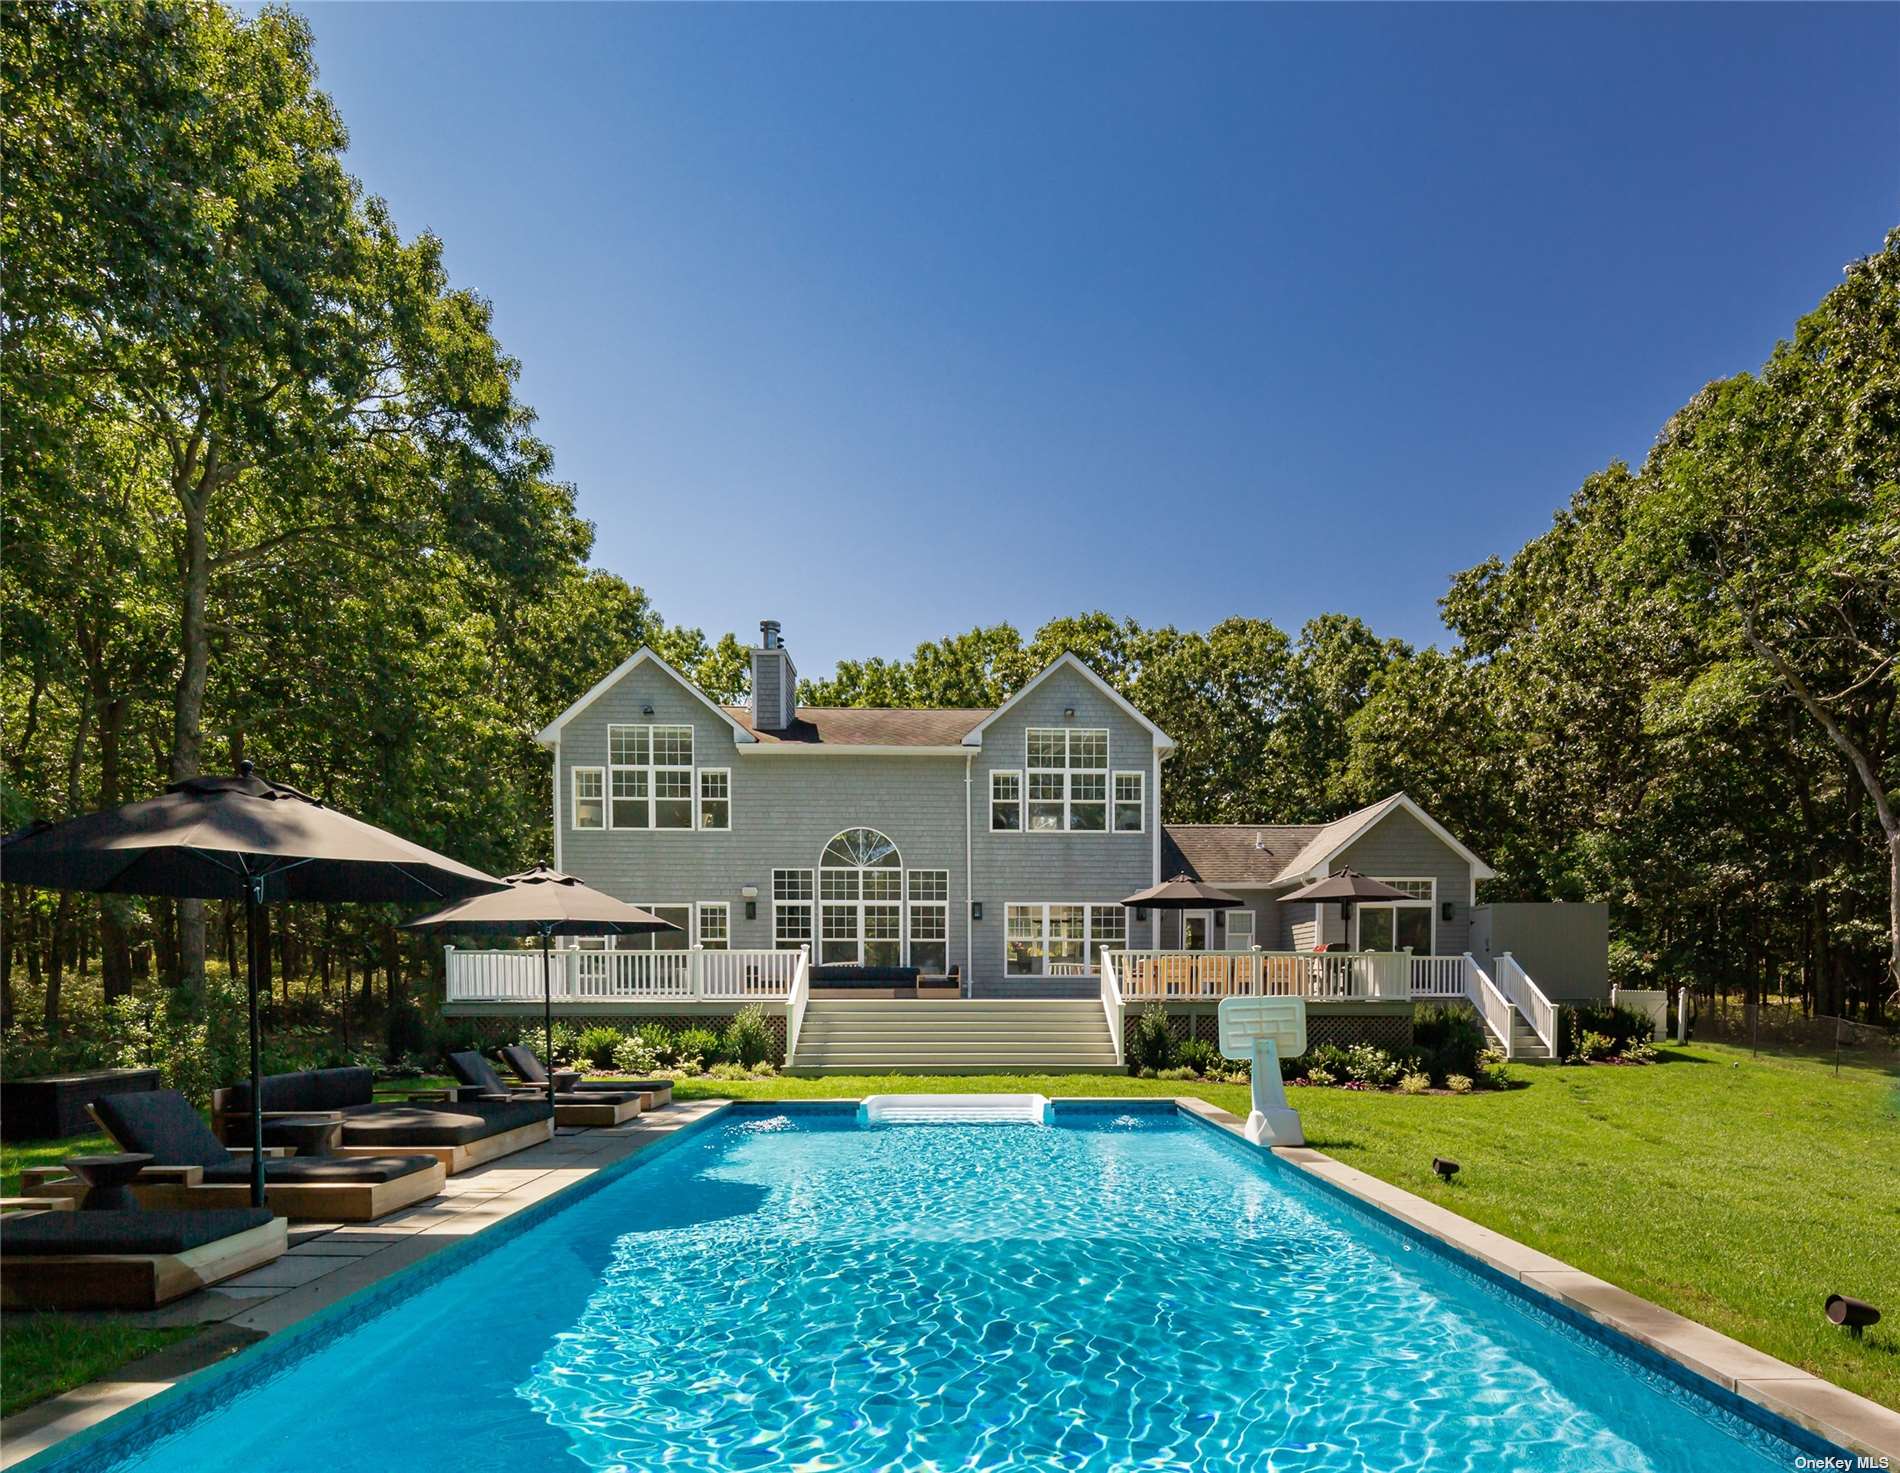 a view of a house with swimming pool and porch